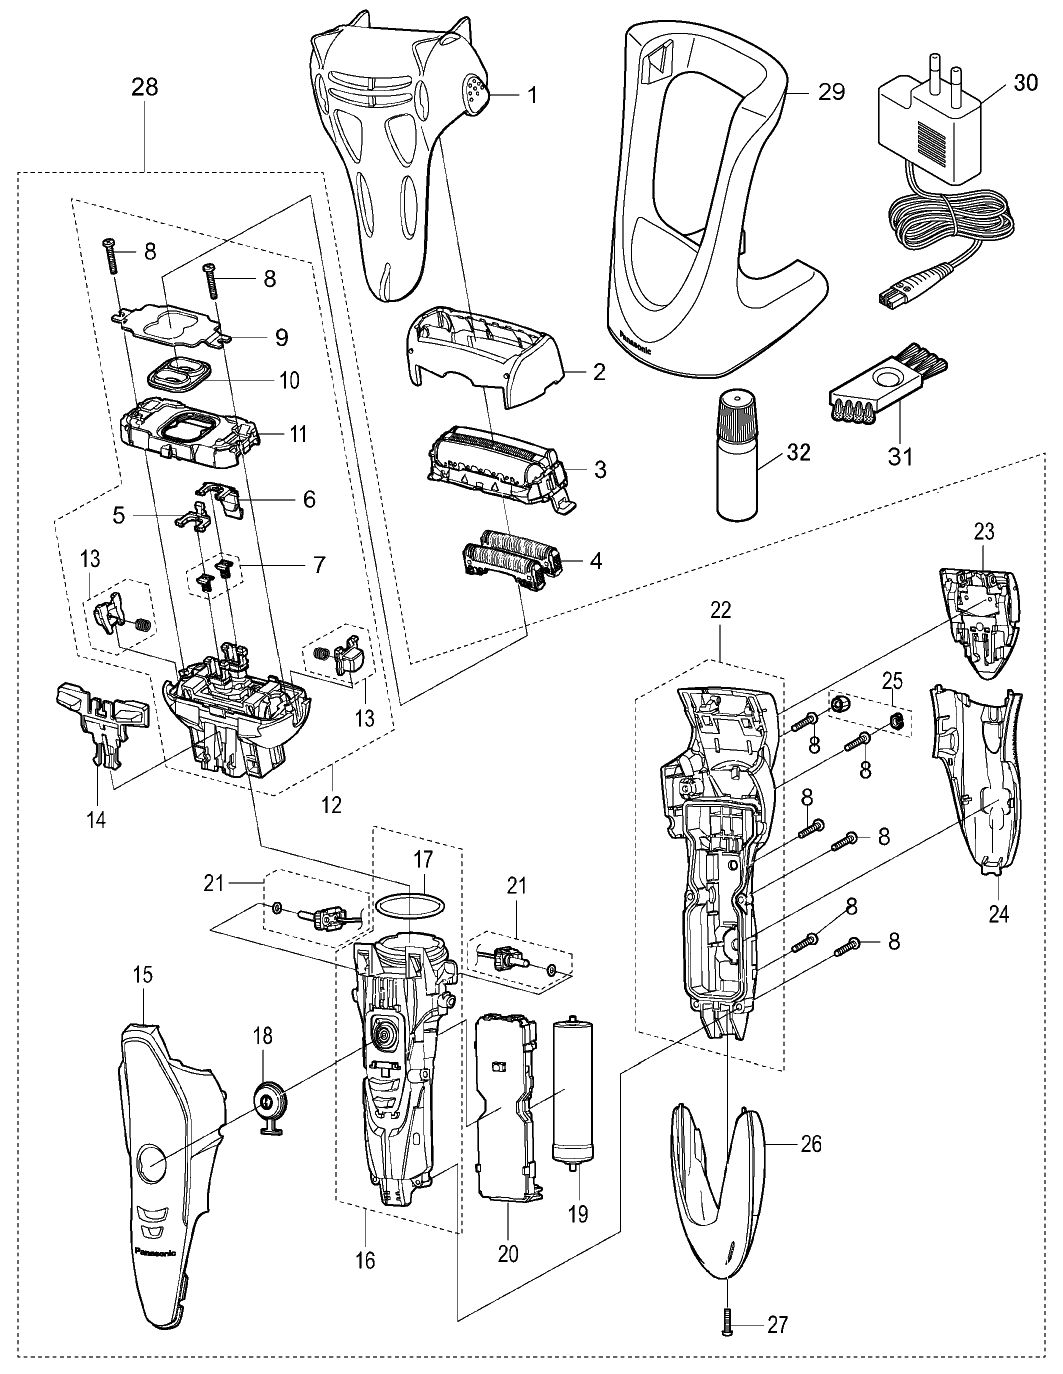 ES-ST2: Exploded View